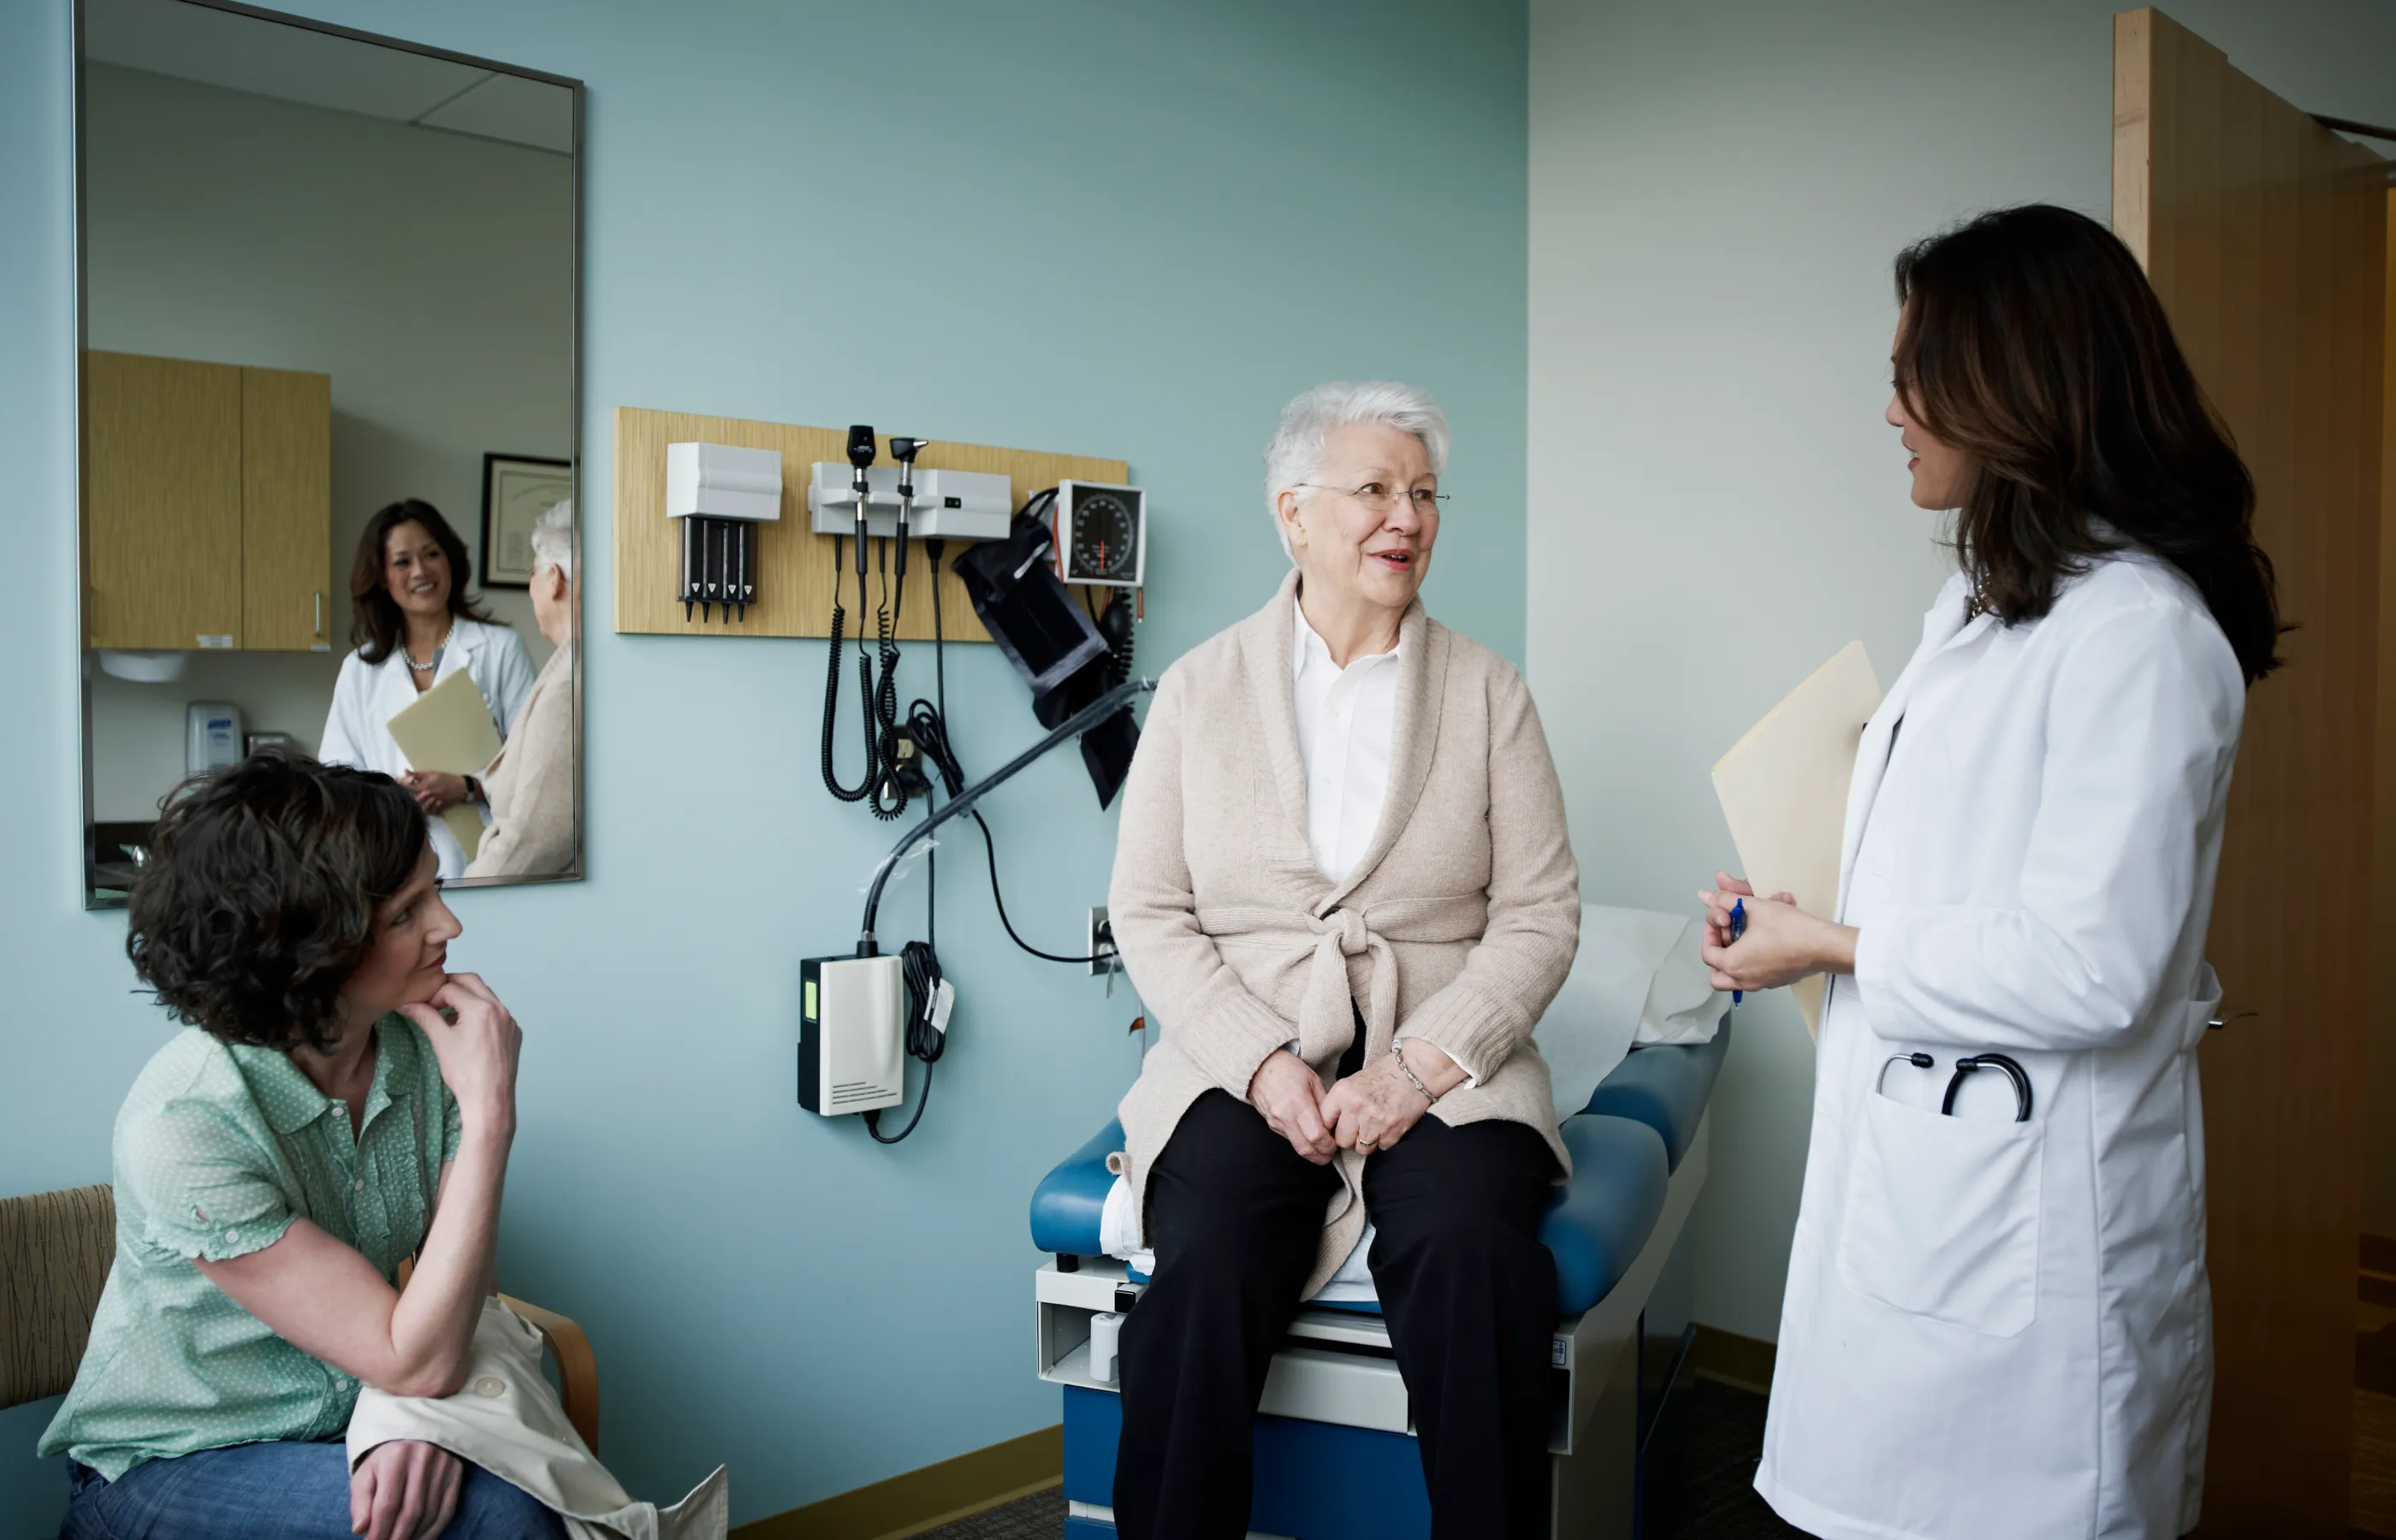 A female physician speaks with a senior woman patient in the exam room